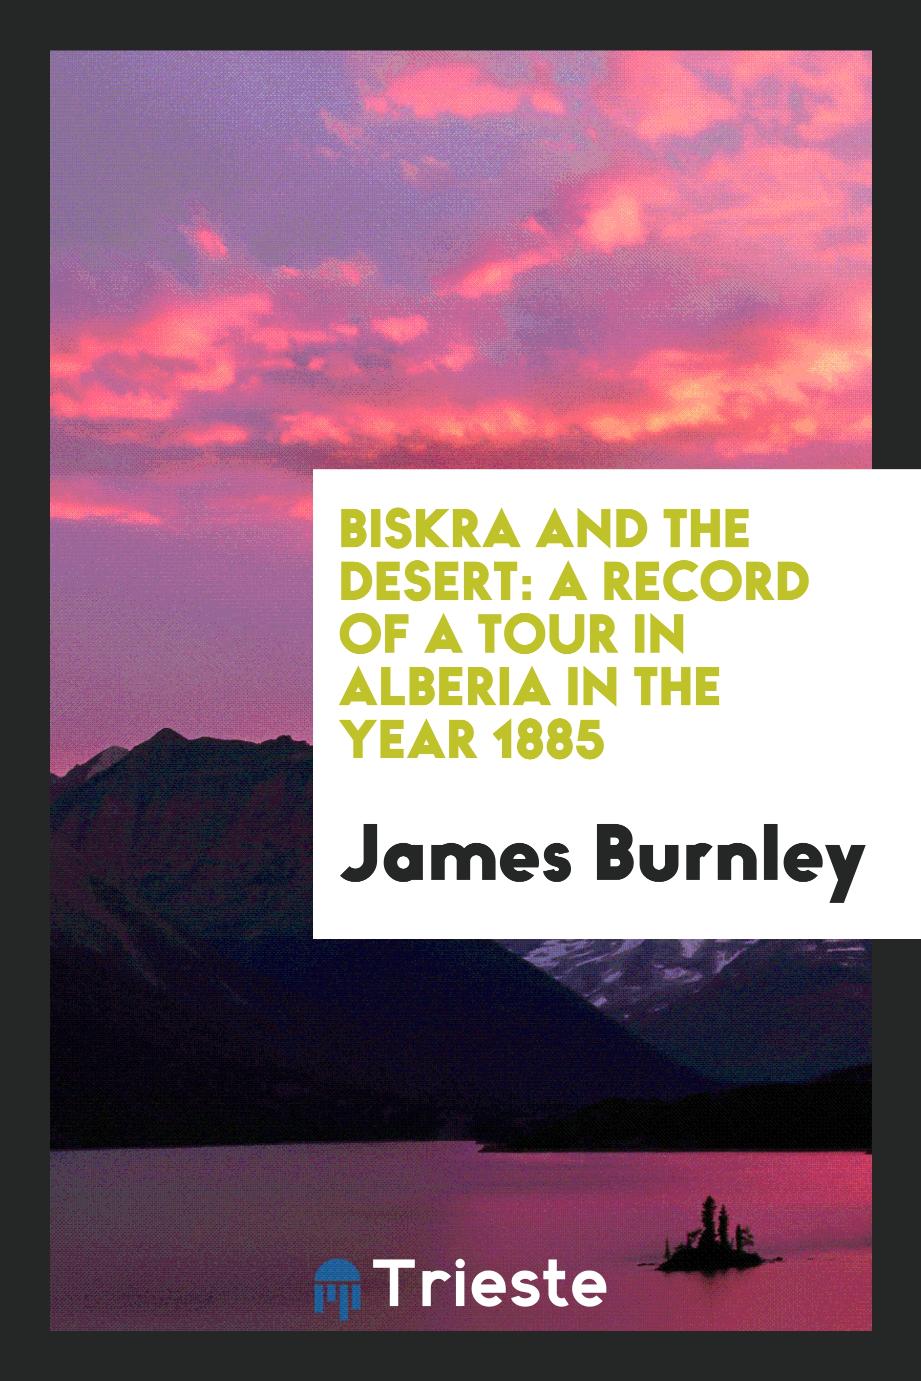 Biskra and the desert: a record of a tour in Alberia in the year 1885